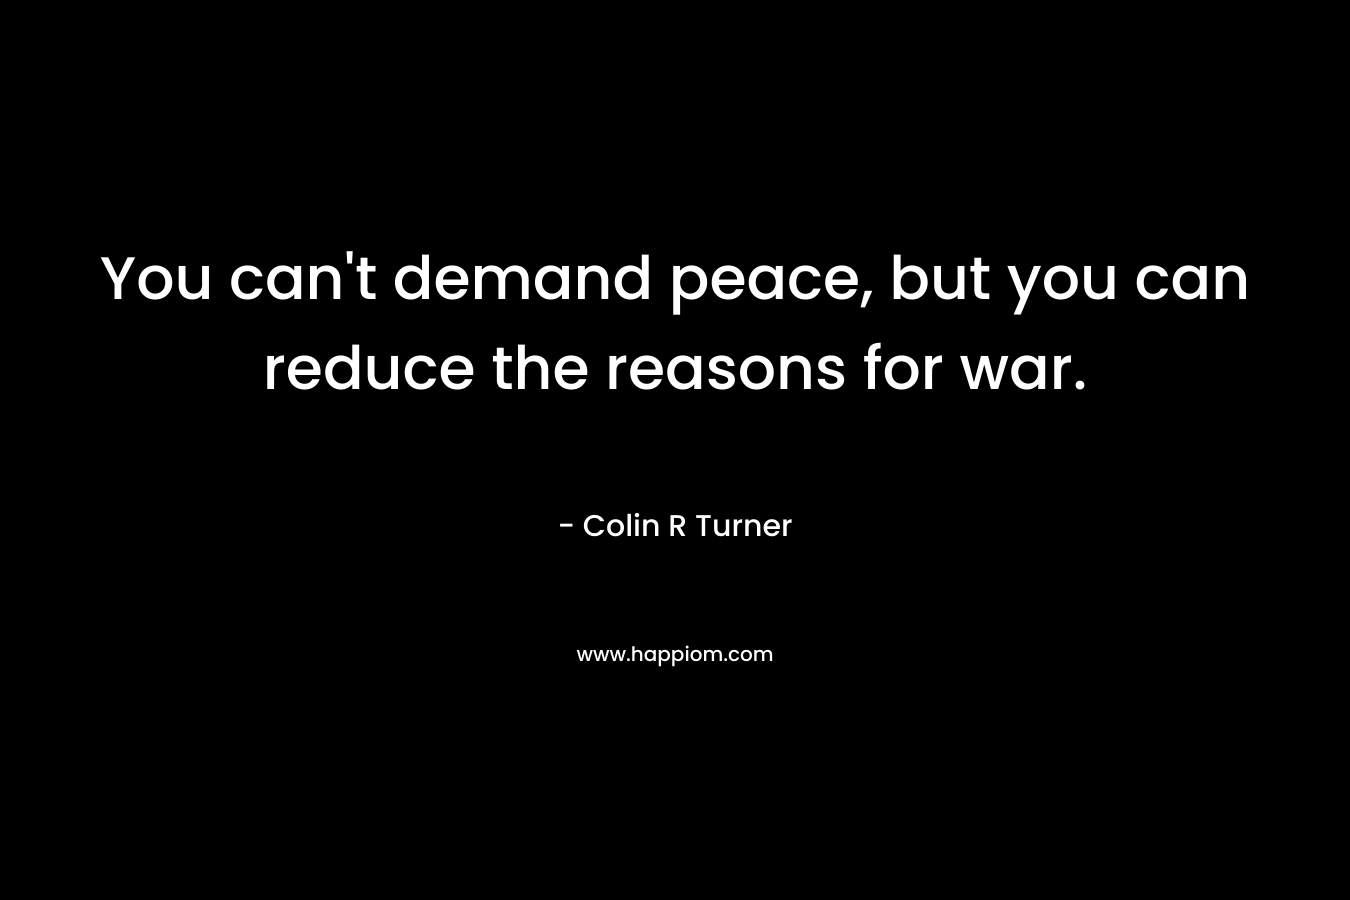 You can’t demand peace, but you can reduce the reasons for war. – Colin R Turner